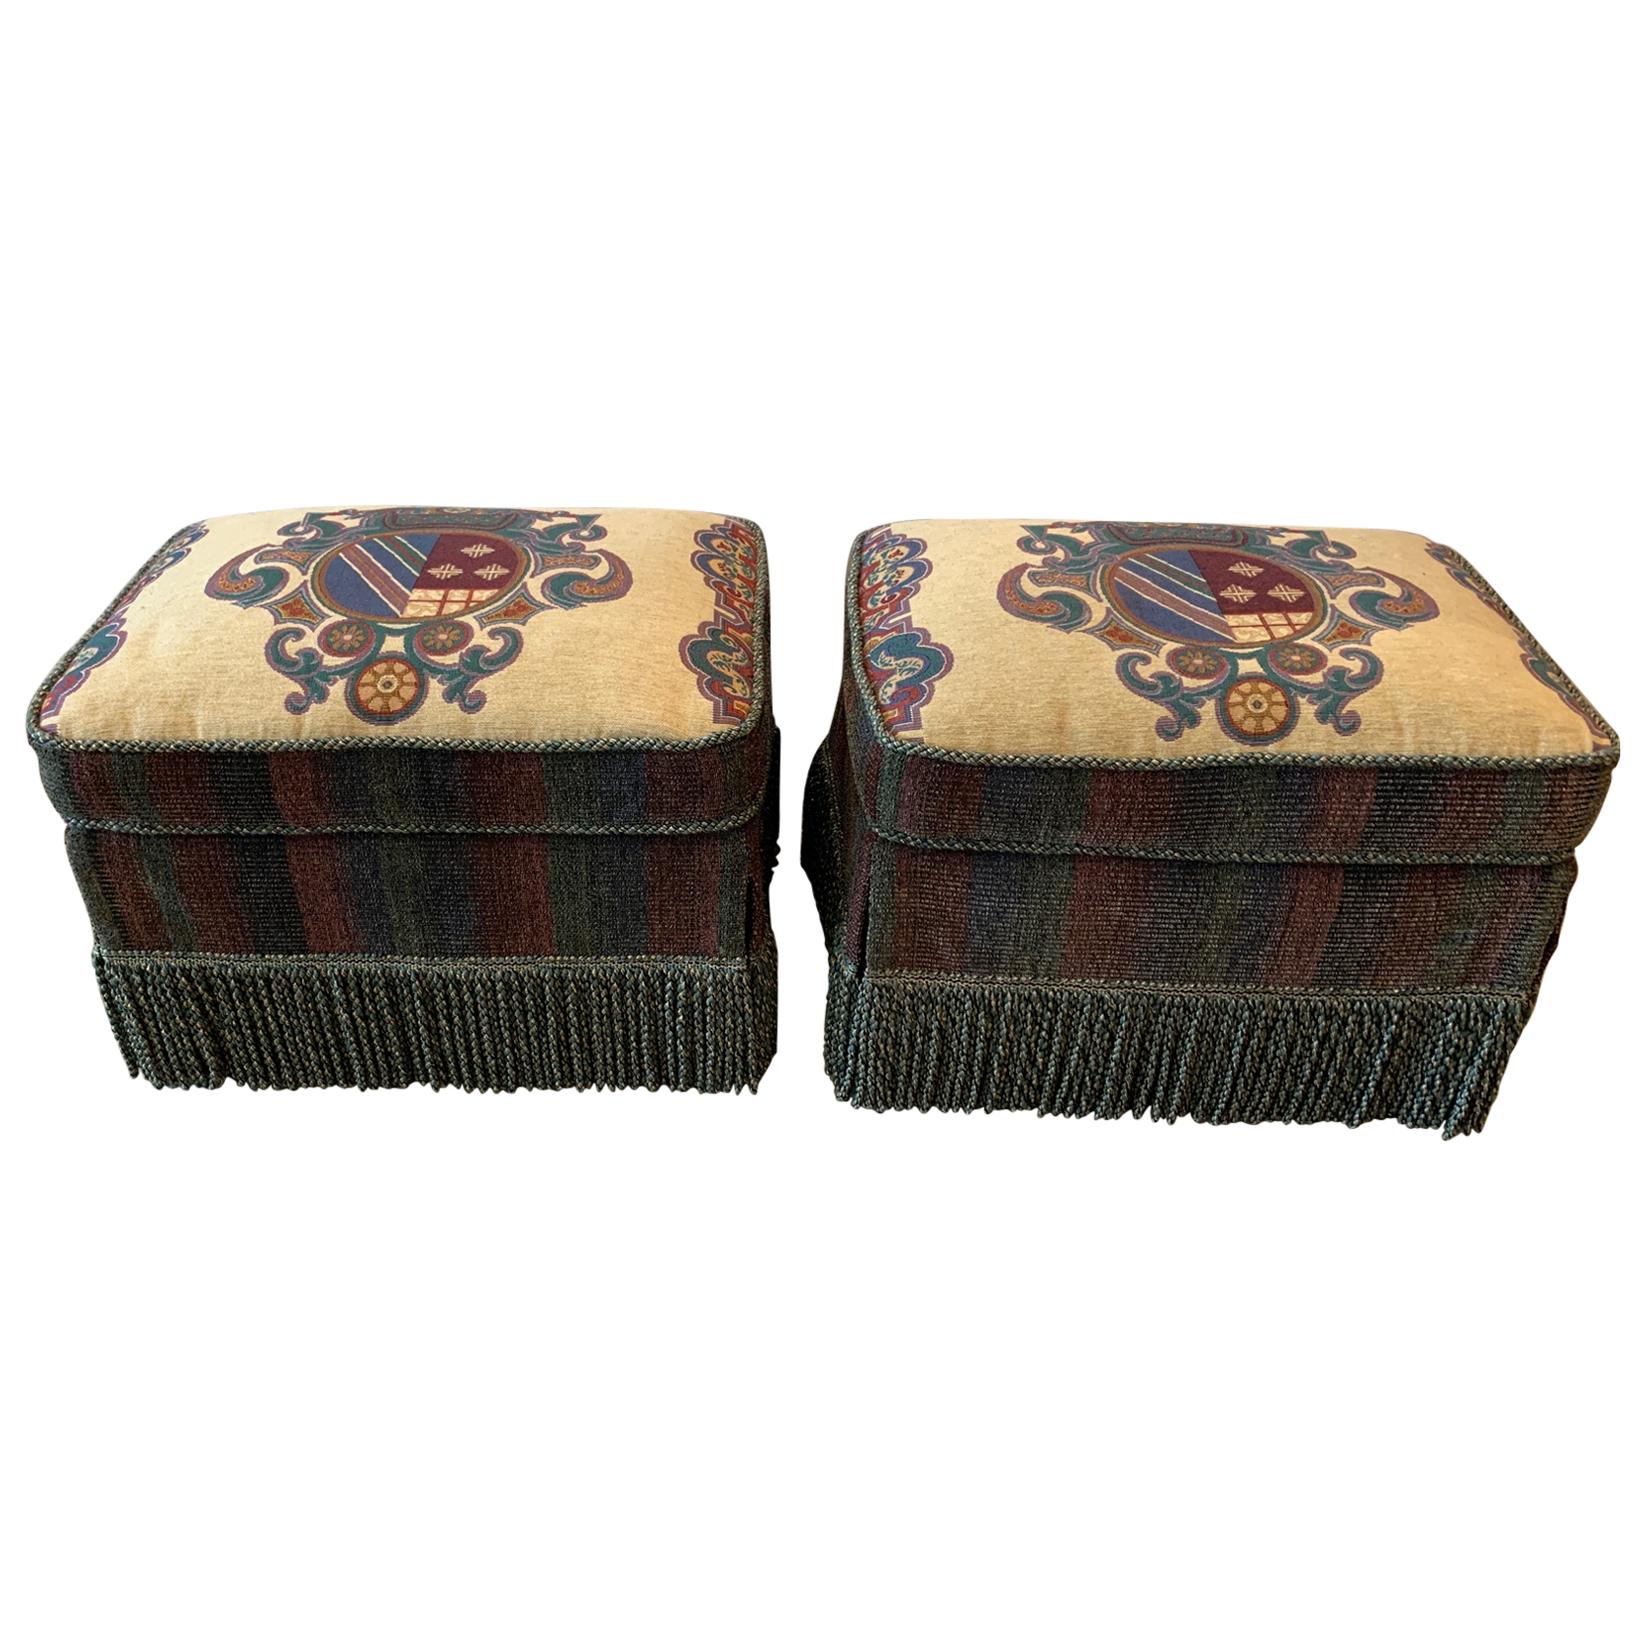 Pair of Armorial Upholstered Ottomans with Bouillon Fringe